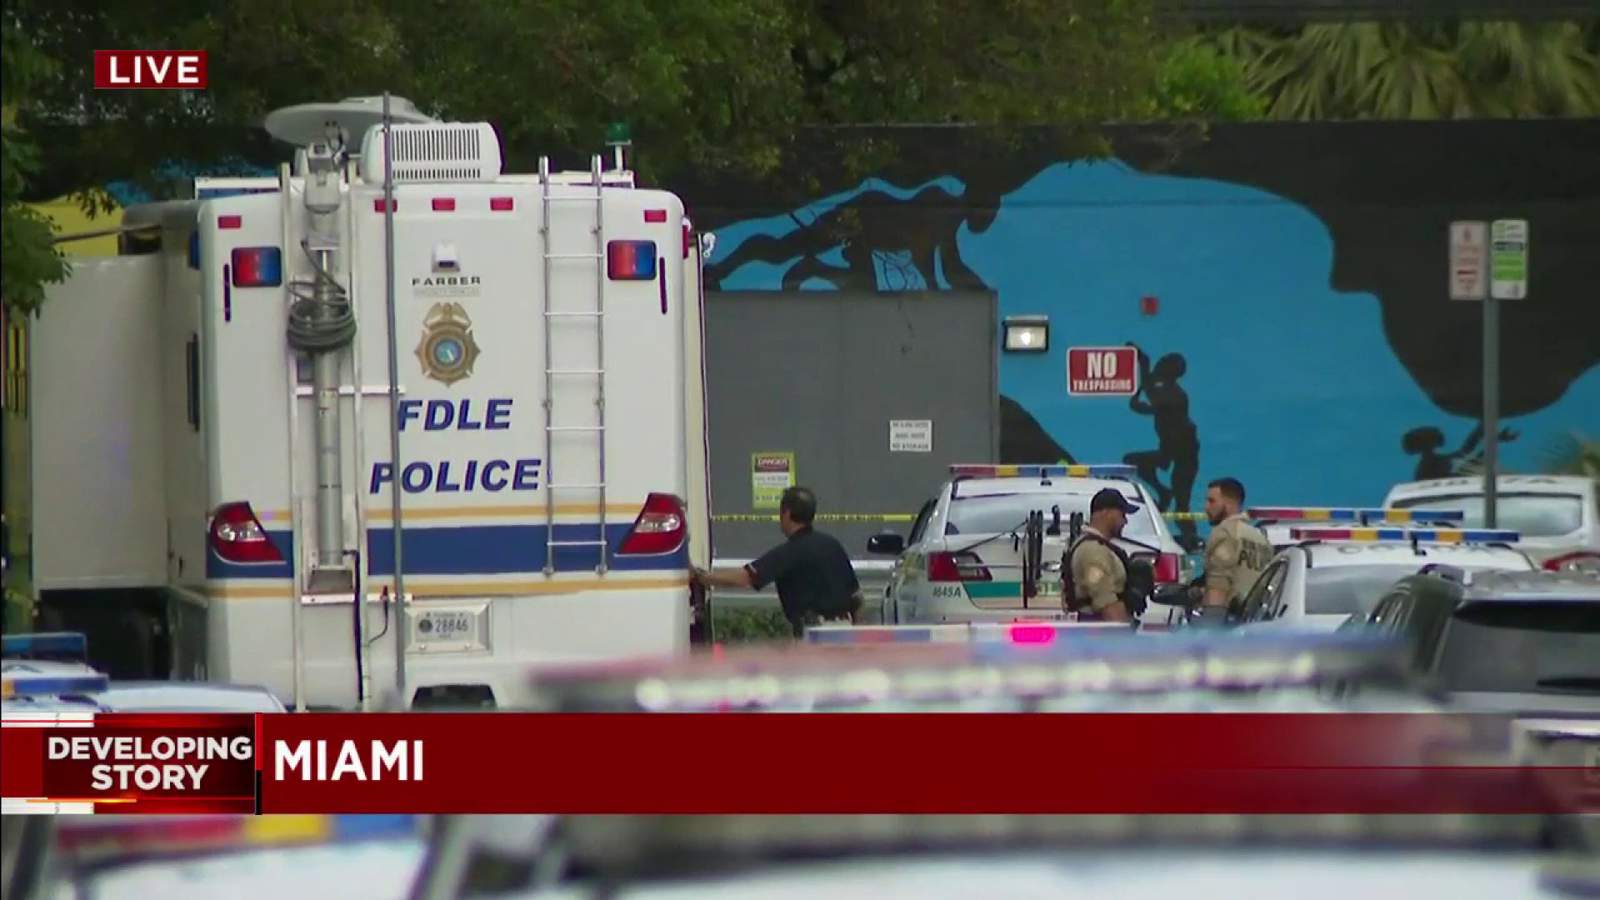 Woman shot dead by police serving eviction warrant in Miami